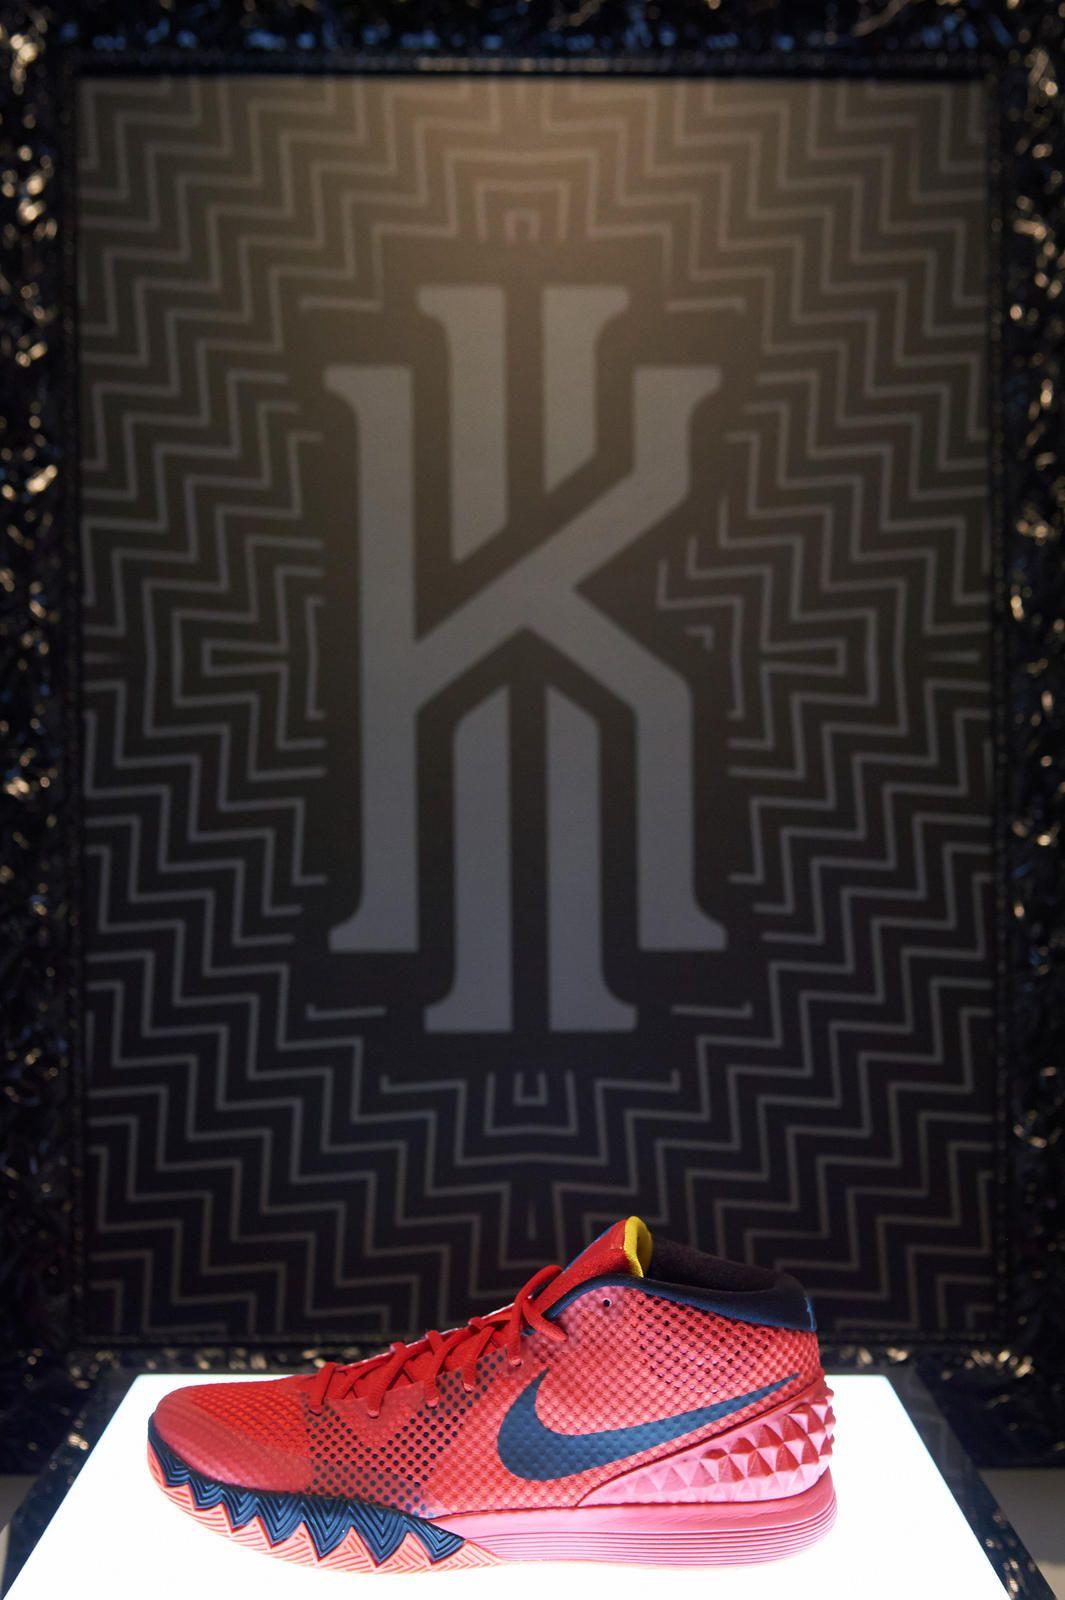 Basketball Players Shoes Logo - 10 things you don't know about Kyrie Irving - Nike News